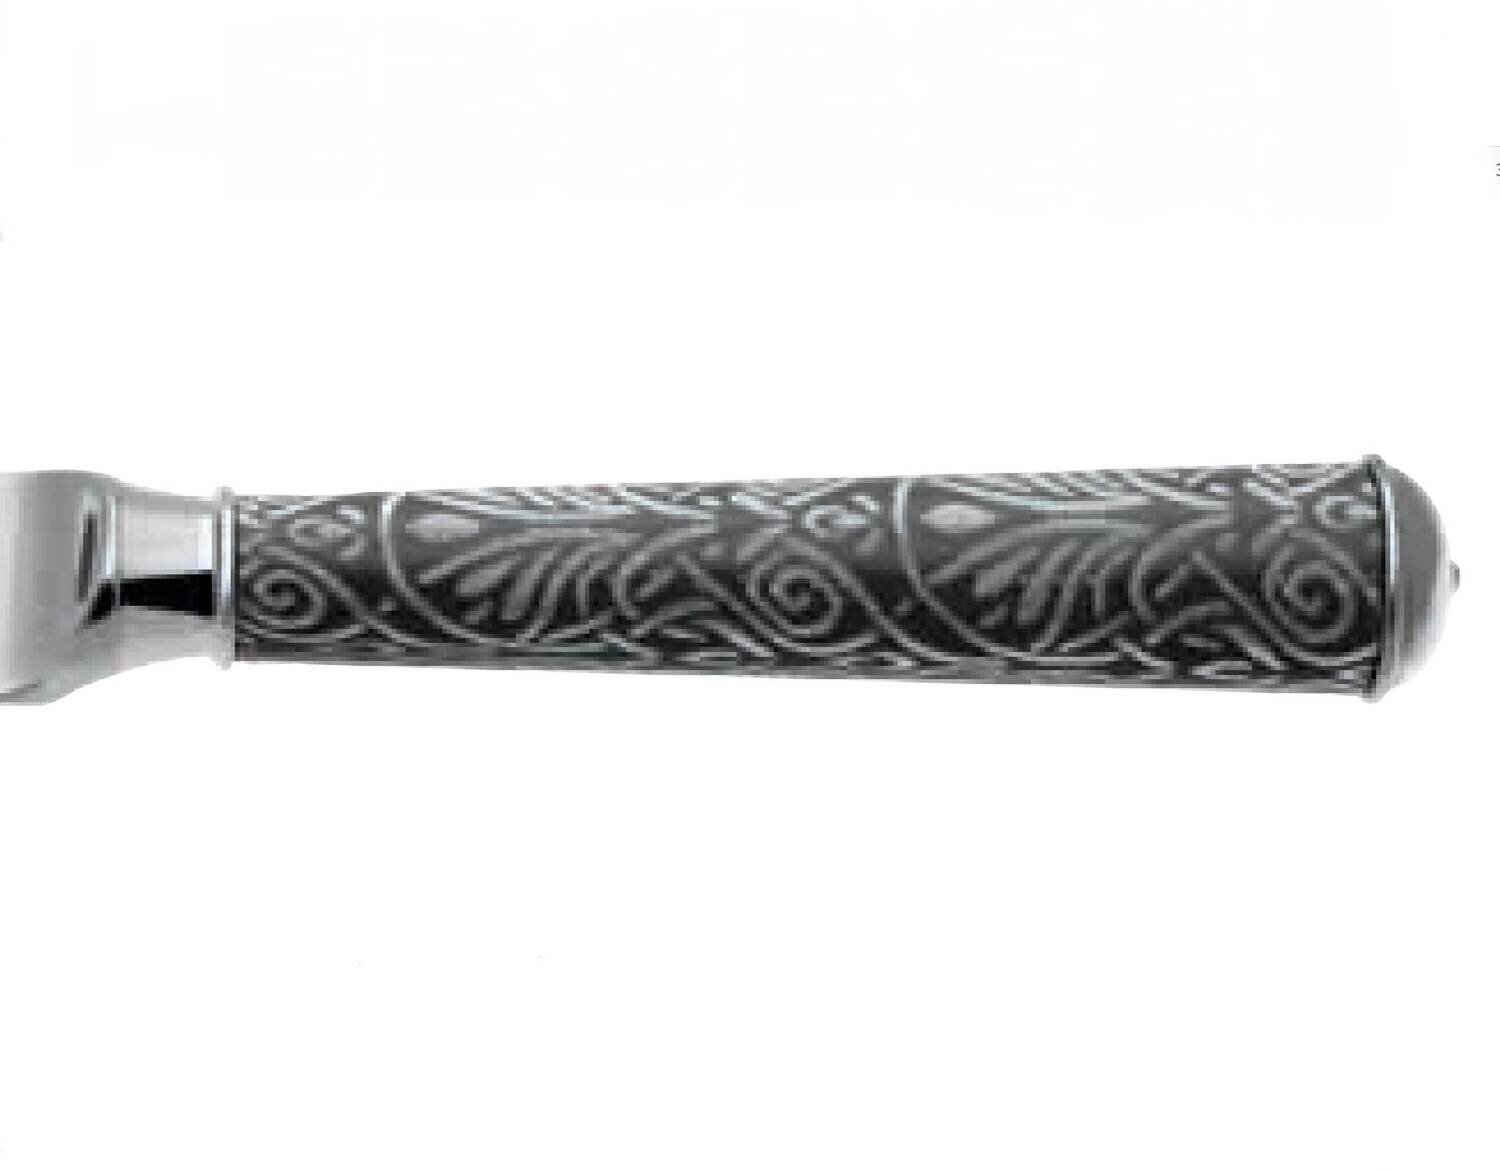 Ercuis Guirlande Lagoon Carving Knife 11.625 Inch Silver Plated F60051S-46